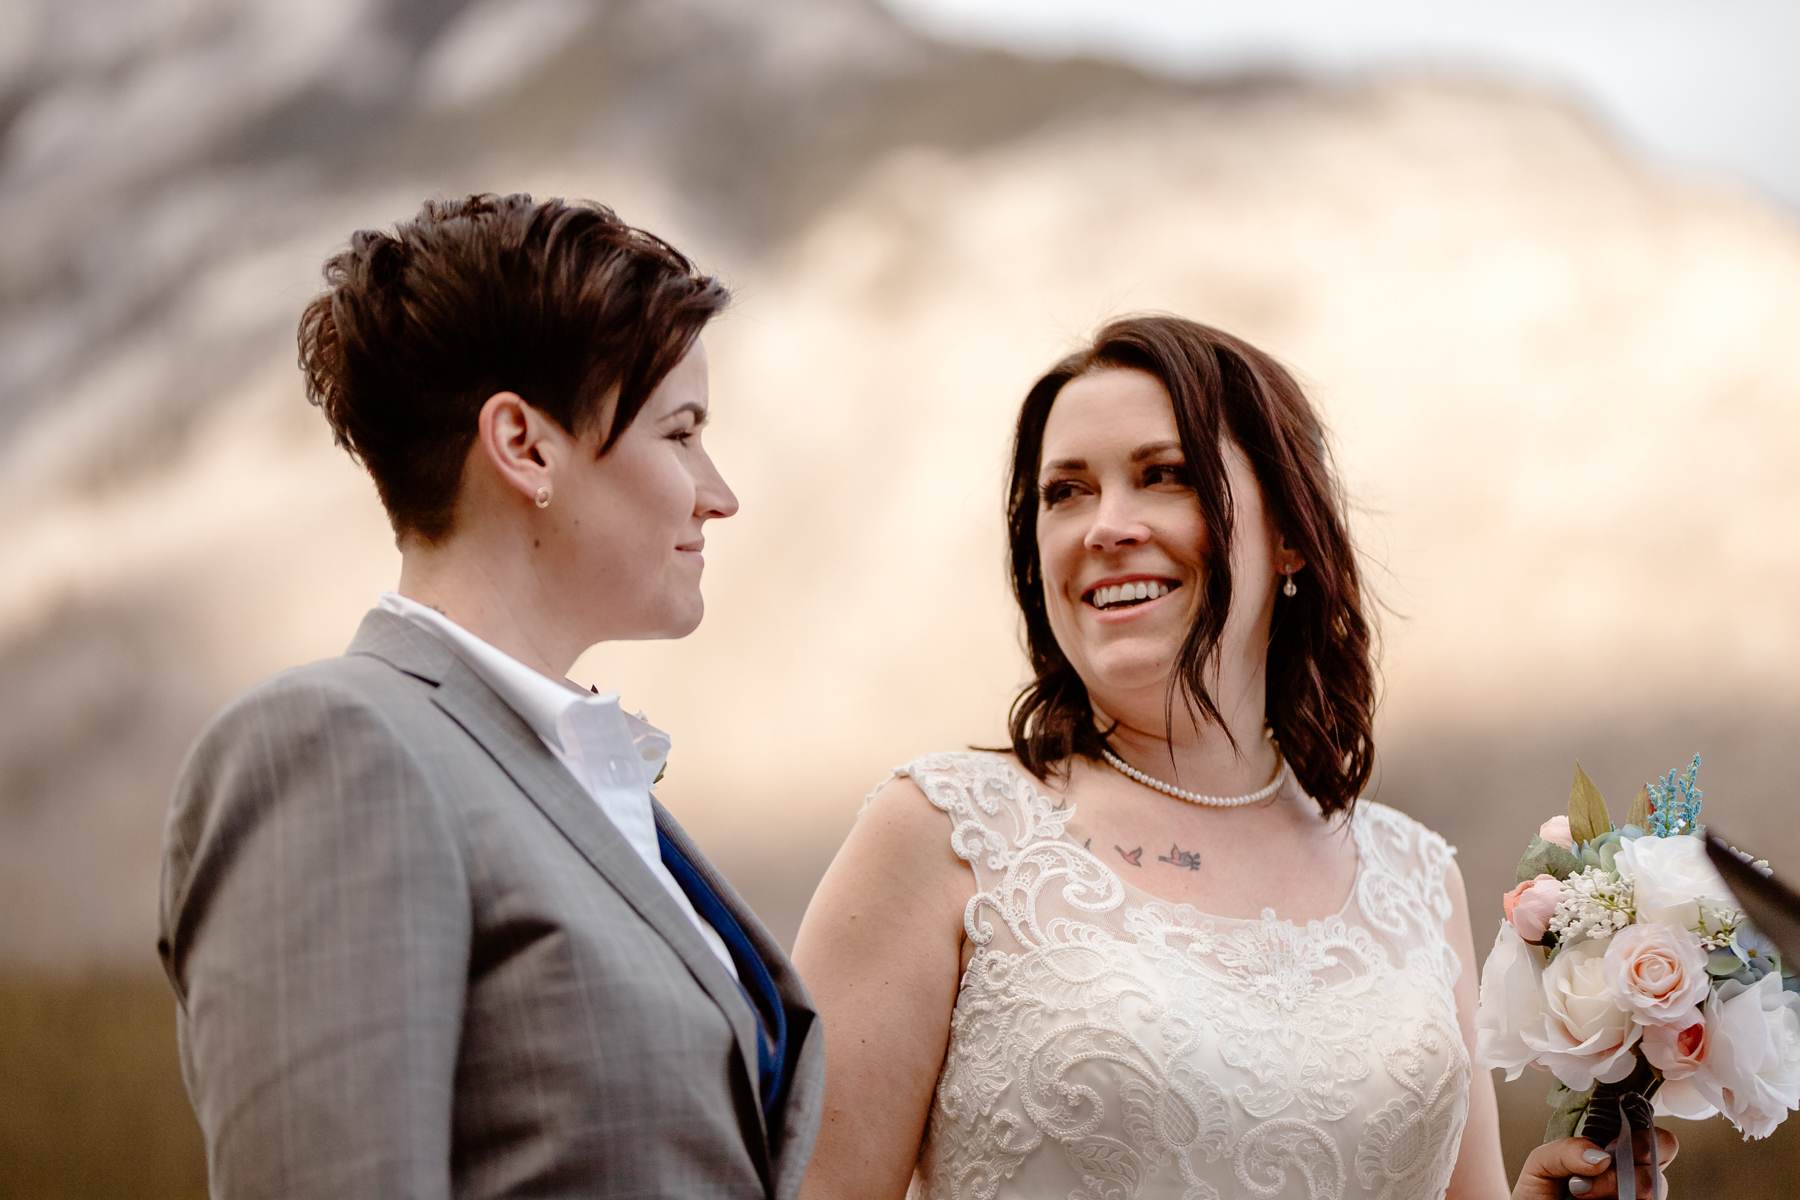 Banff National Park Elopement Photography with LGBTQ-friendly photographers - Image 18